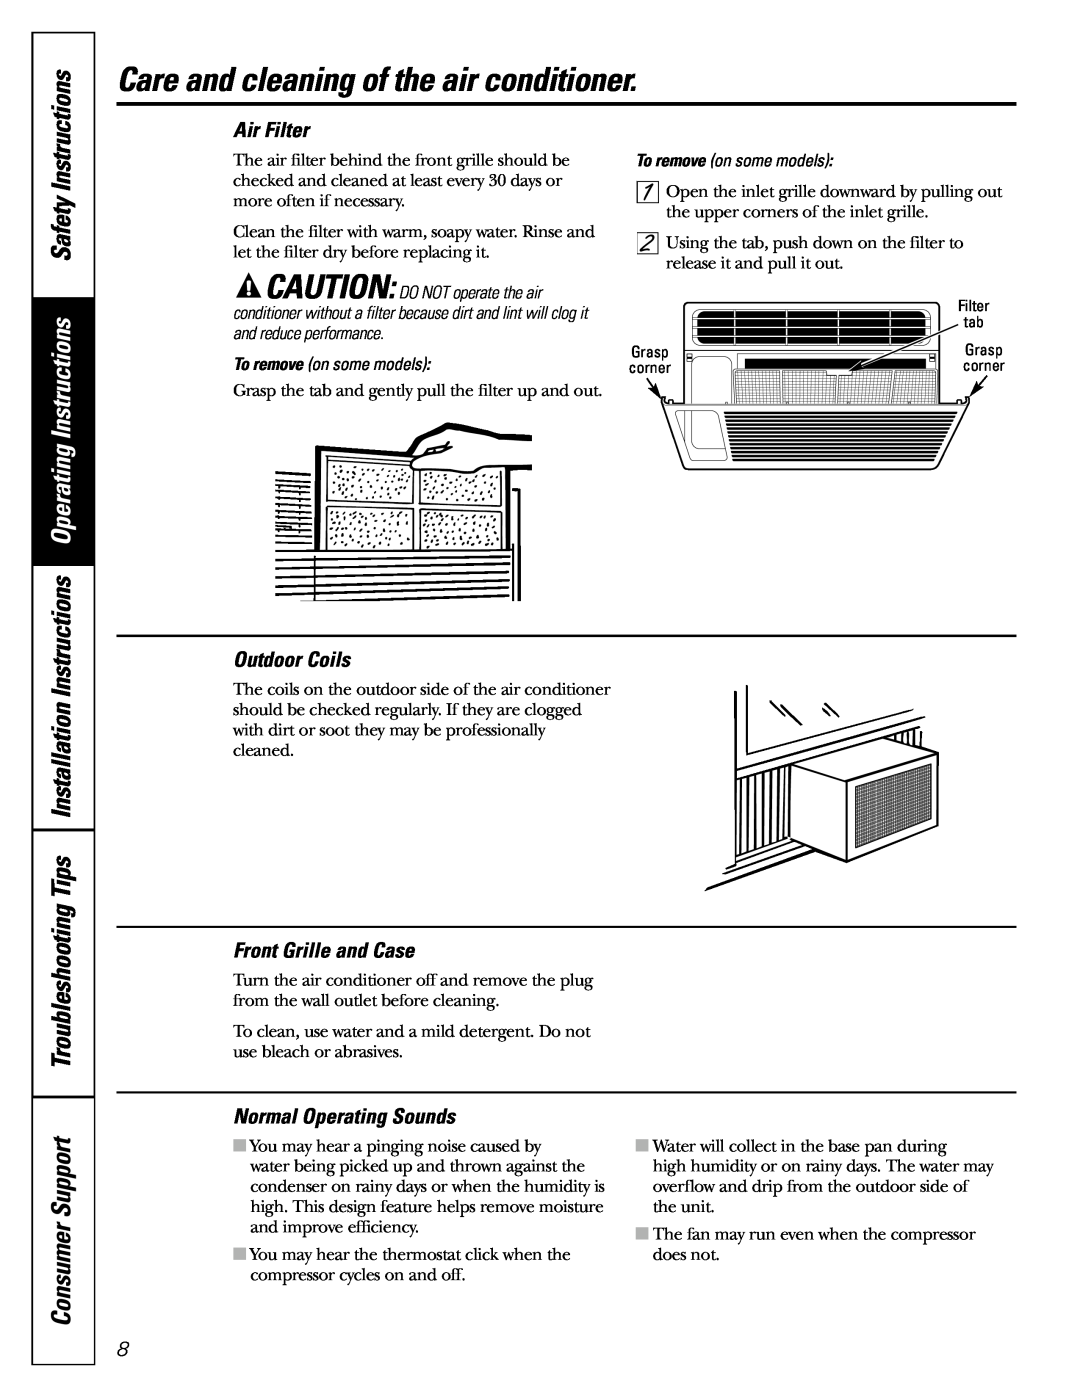 GE AGF05 Care and cleaning of the air conditioner, Air Filter, Normal Operating Sounds, Consumer Support 